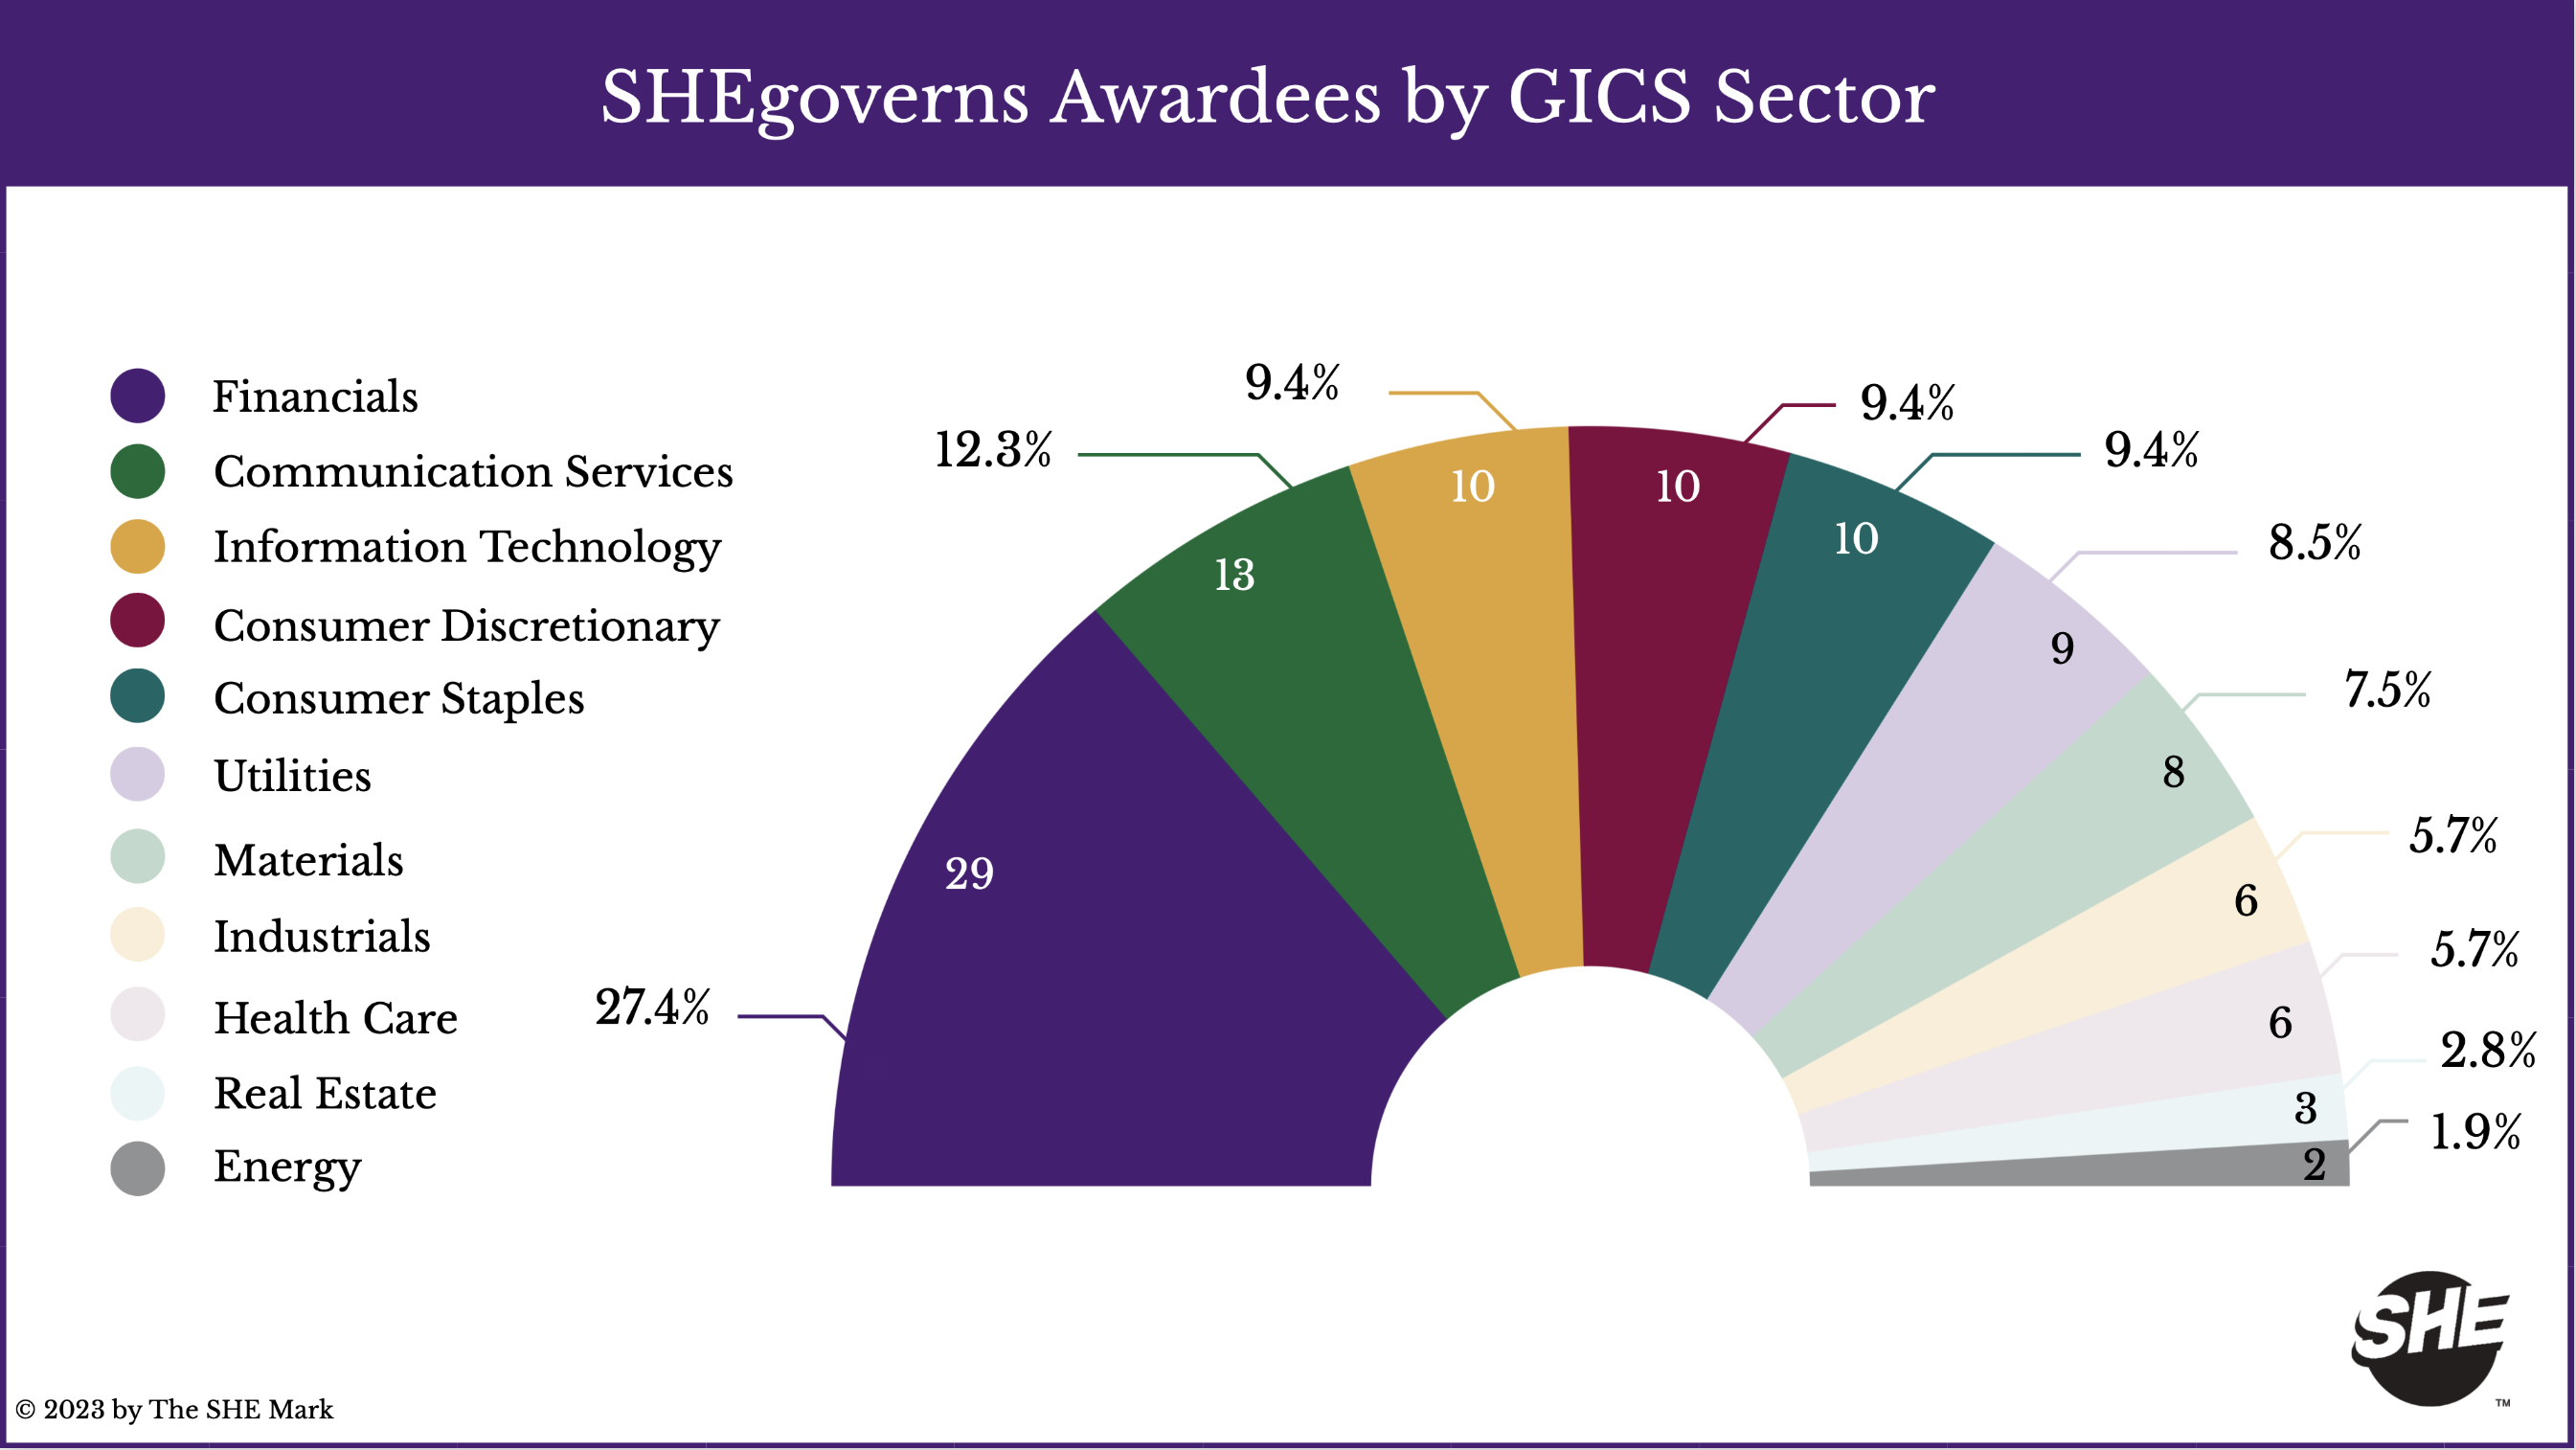 SHEgoverns Awardees by GICS Sector